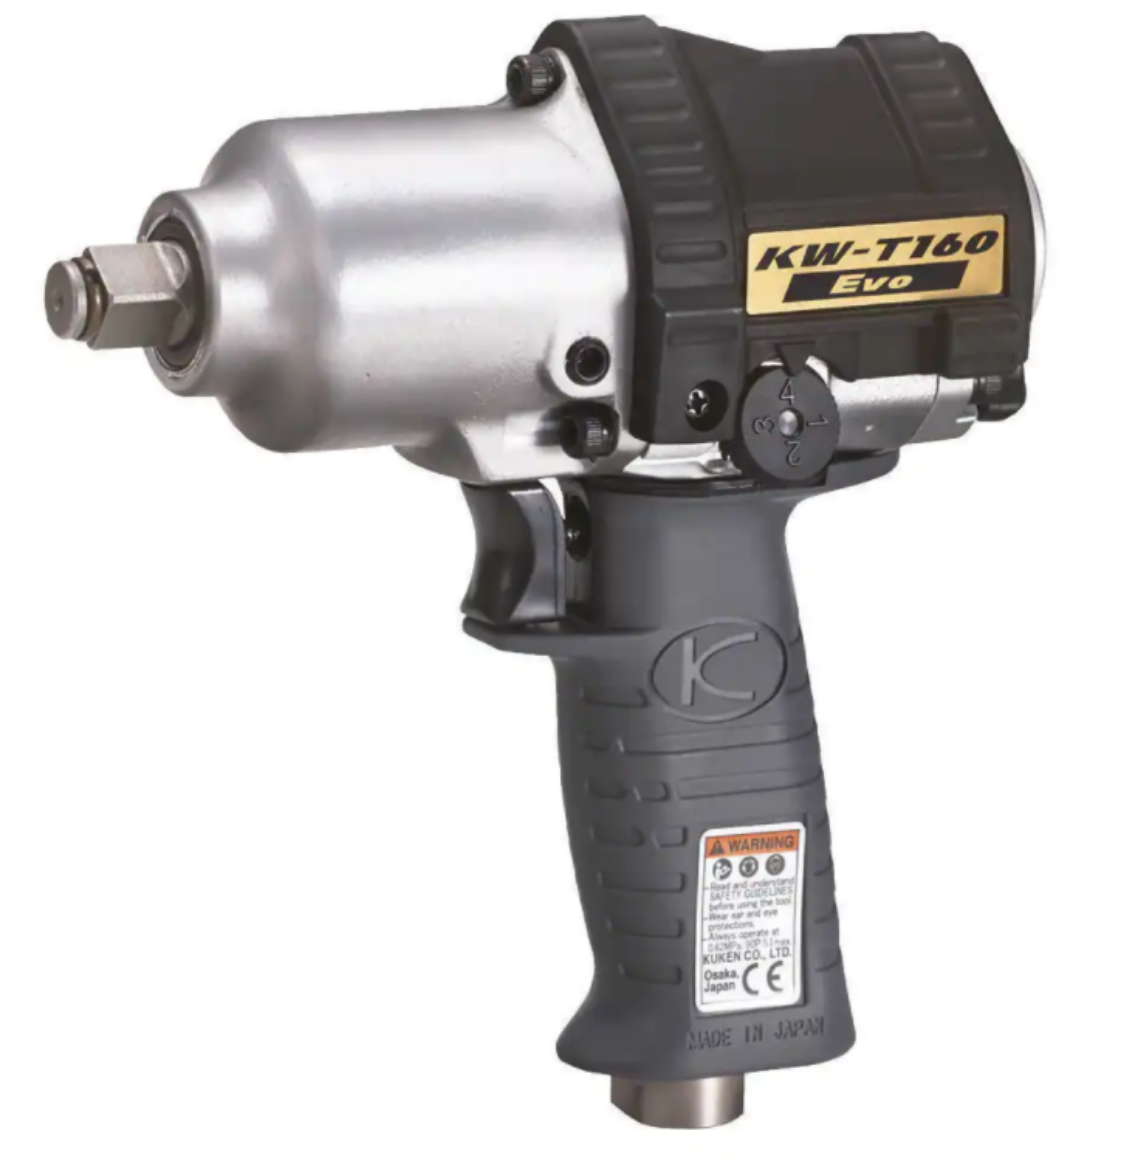 Picture of 1/2" IMPACT WRENCH - Kuken